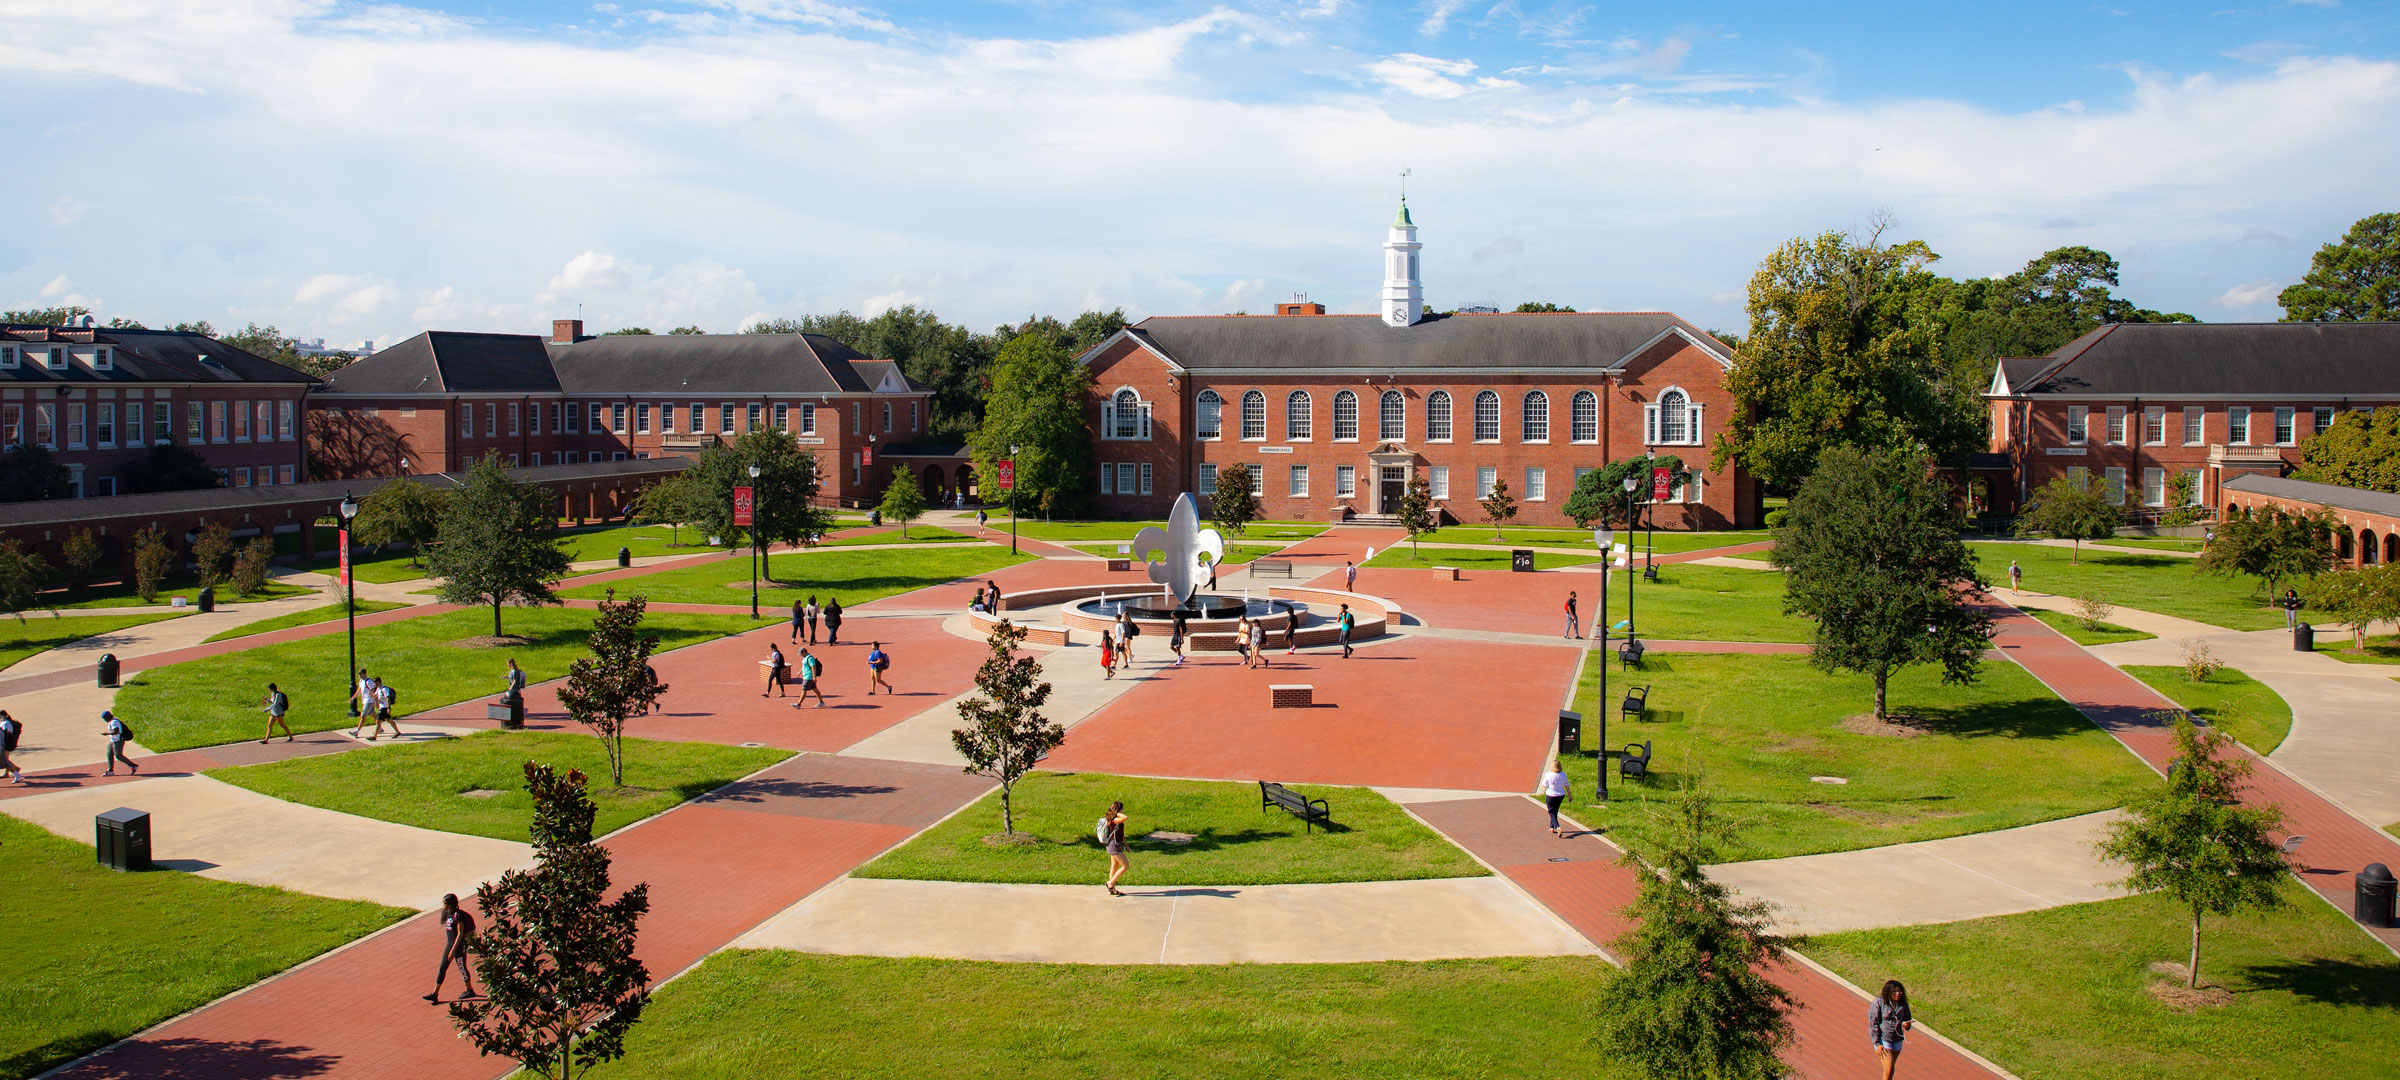 Aerial view of the University of Louisiana at 69ý Quad with the fleur de lis statue and sidewalks